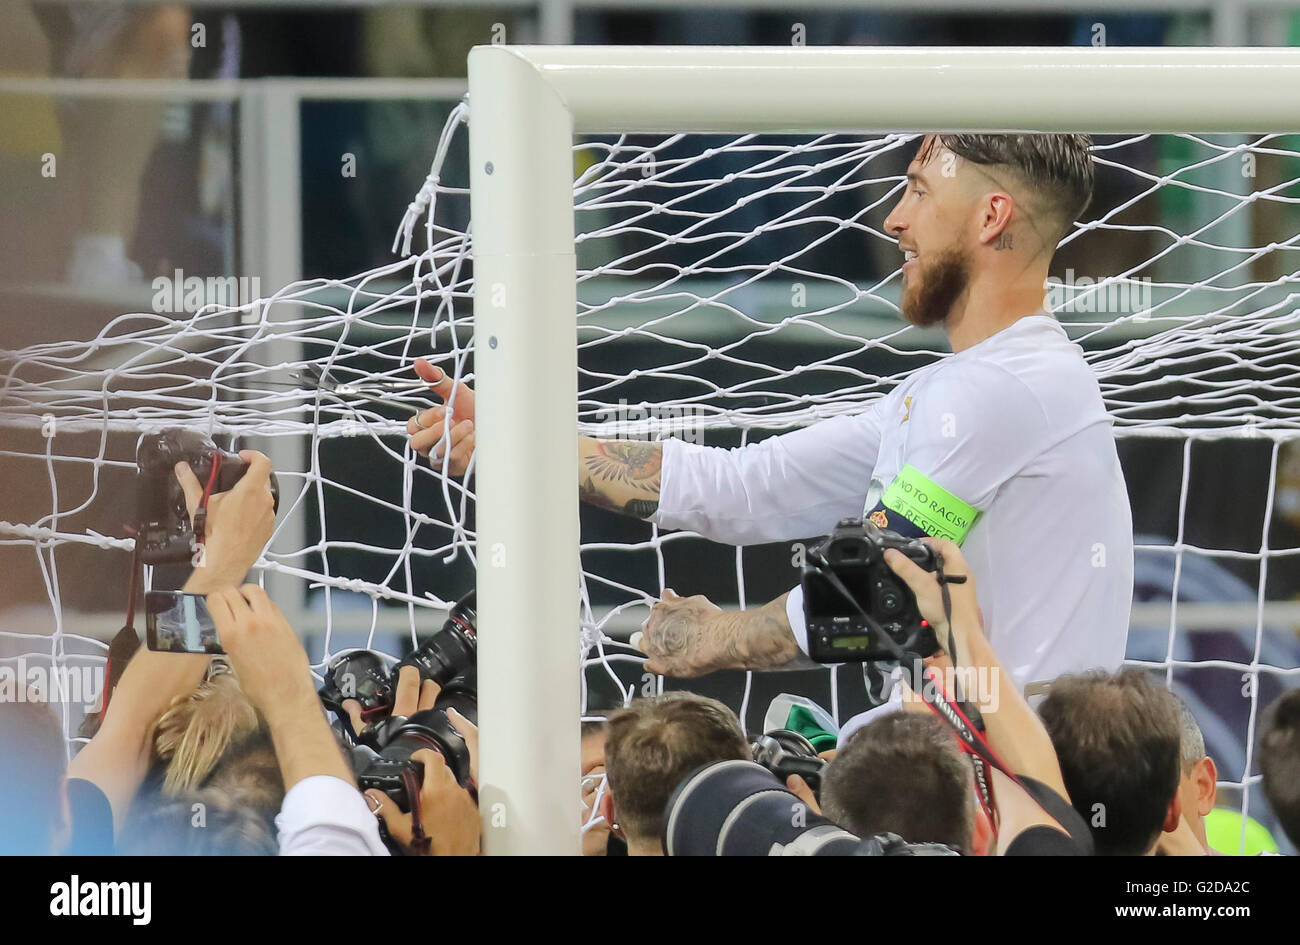 Milan, Italy. 28th May, 2016. Sergio RAMOS, Real Madrid 4 cuts the net Champions League Trophy  ceremony, celebration REAL MADRID - ATLETICO MADRID 5-4 a.P.  Fussball UEFA Champions League, Final, Milano, Italy, May 28th, 2016 CL Saison 2015/2016 Credit:  Peter Schatz / Alamy Live News Stock Photo